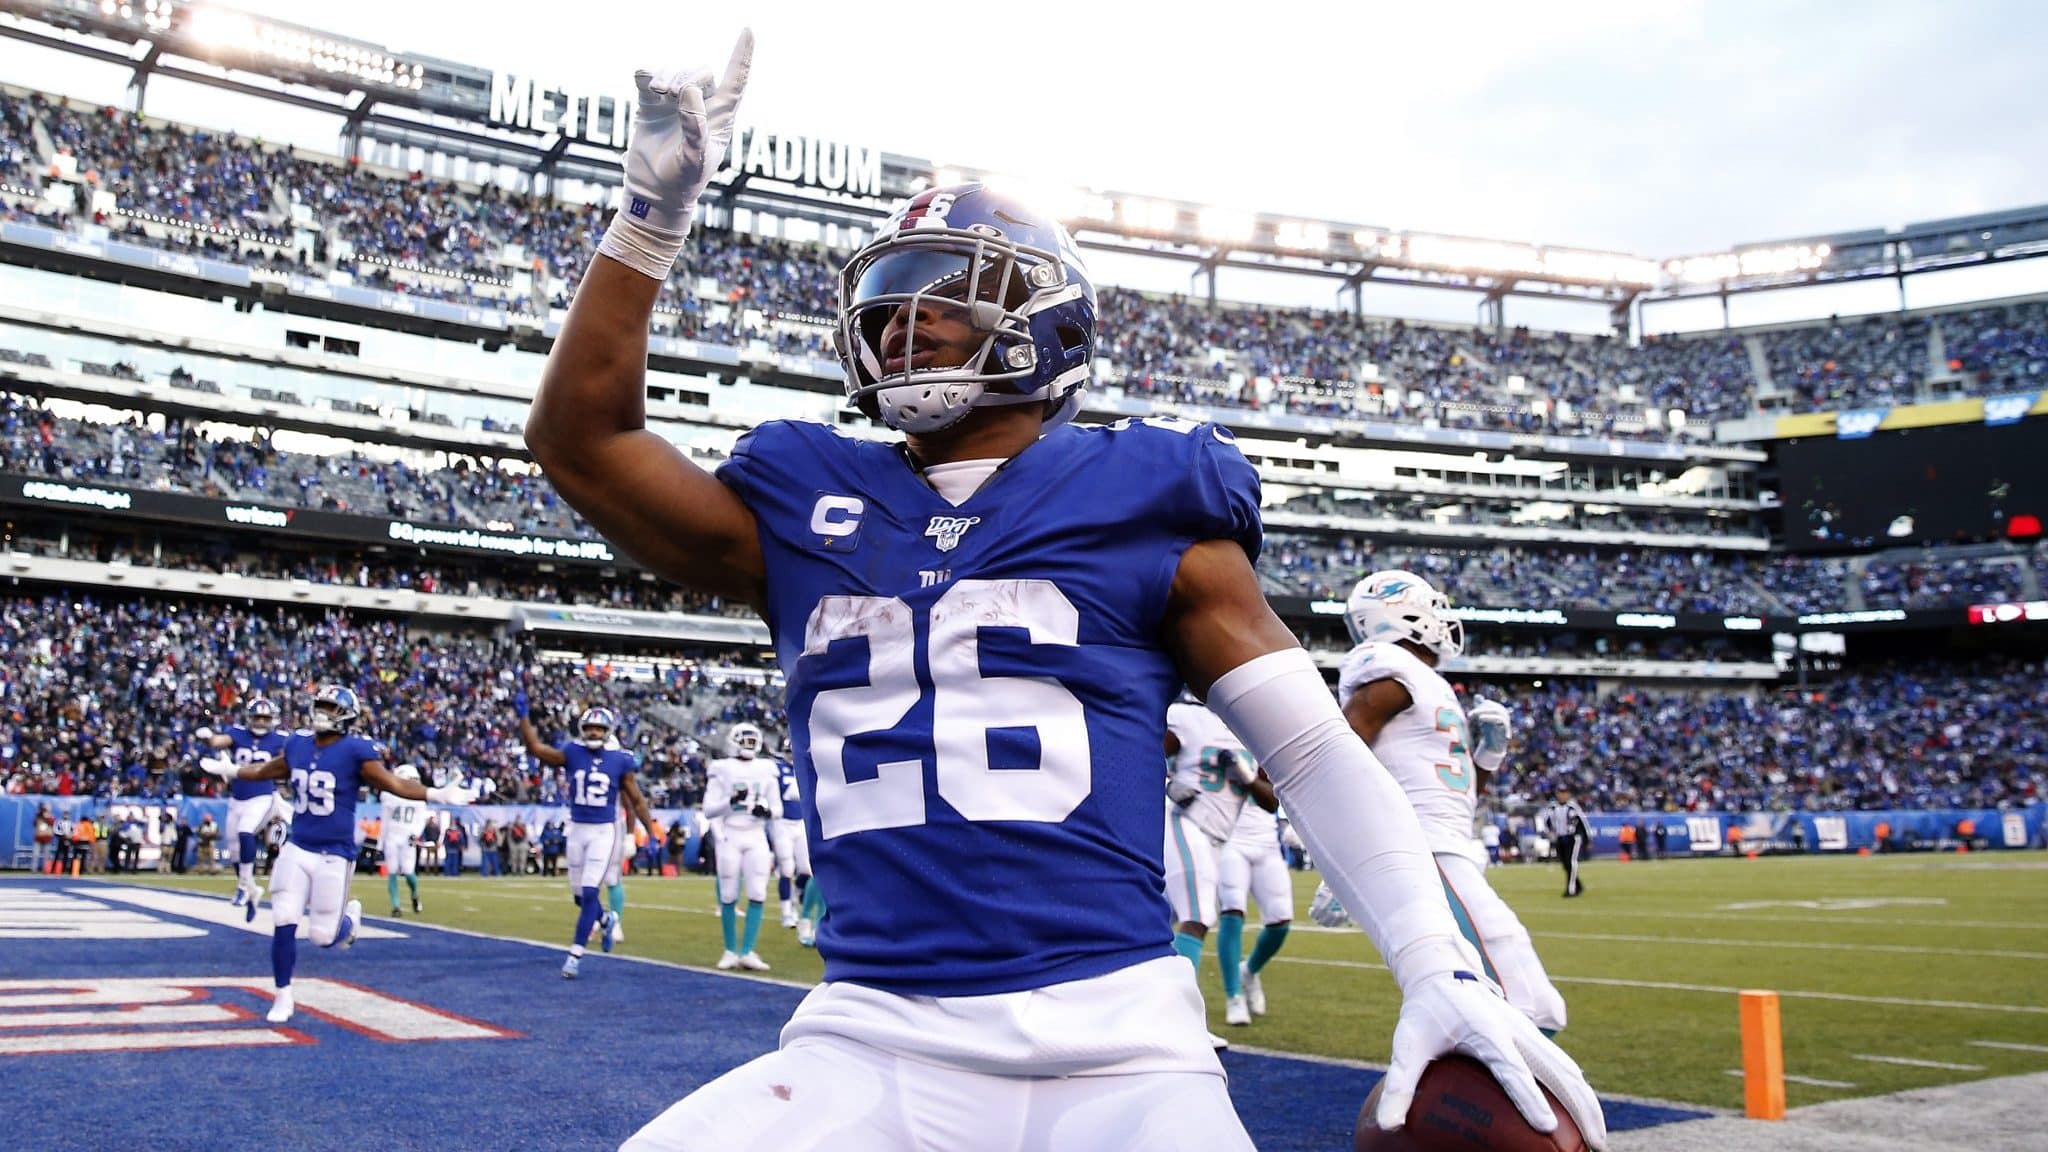 EAST RUTHERFORD, NEW JERSEY - DECEMBER 15: Saquon Barkley #26 of the New York Giants celebrates his touchdown in the fourth quarter against the Miami Dolphins at MetLife Stadium on December 15, 2019 in East Rutherford, New Jersey.The New York Giants defeated the Miami Dolphins 31-13